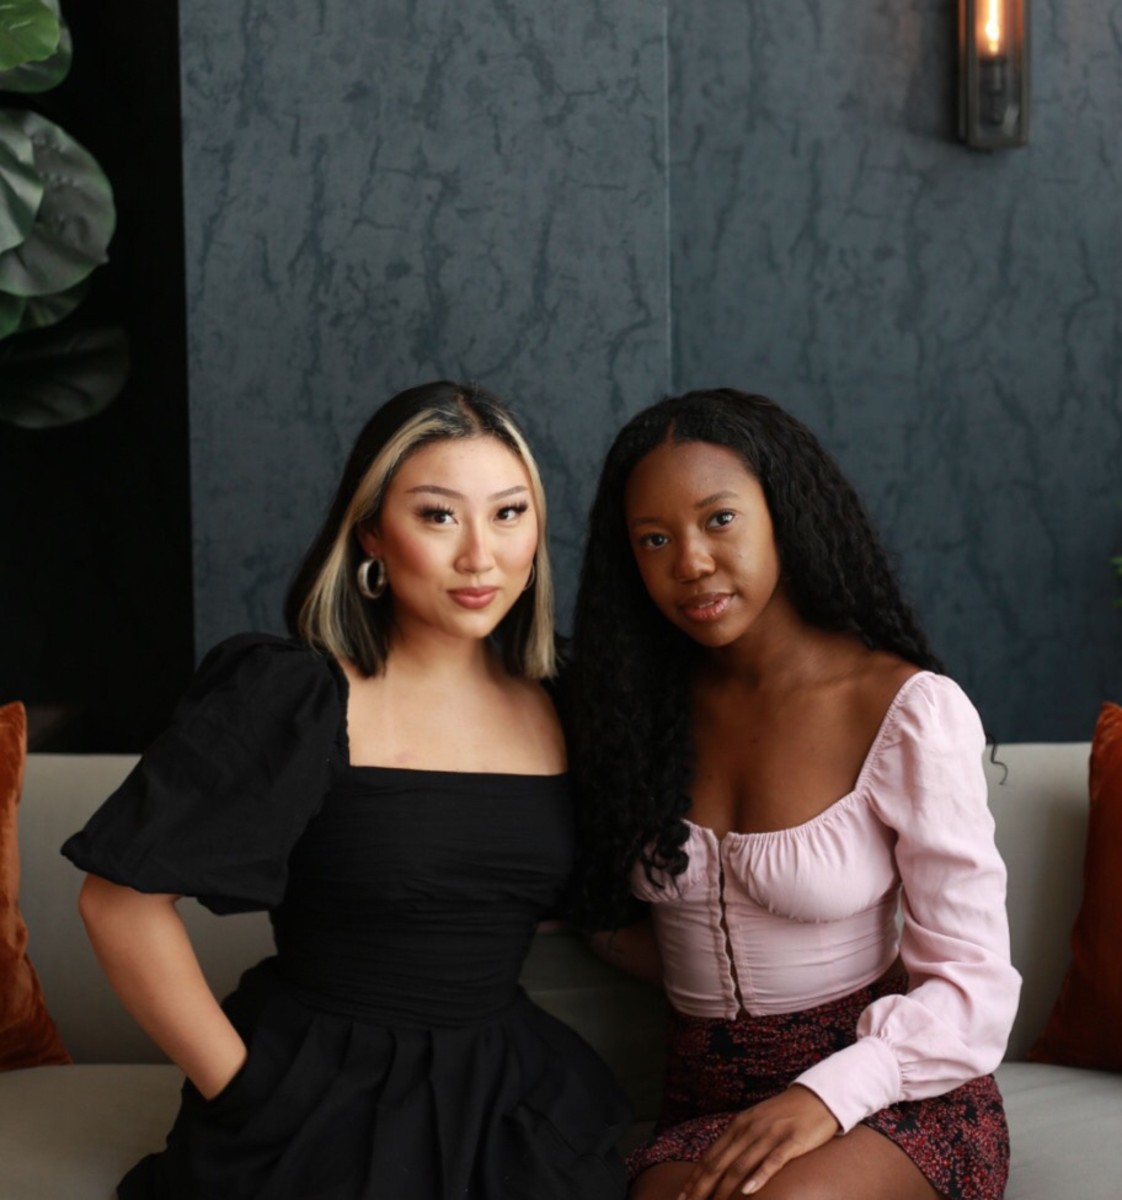 Claudia Teng and Olamide Olowe, co-founders of Topicals.